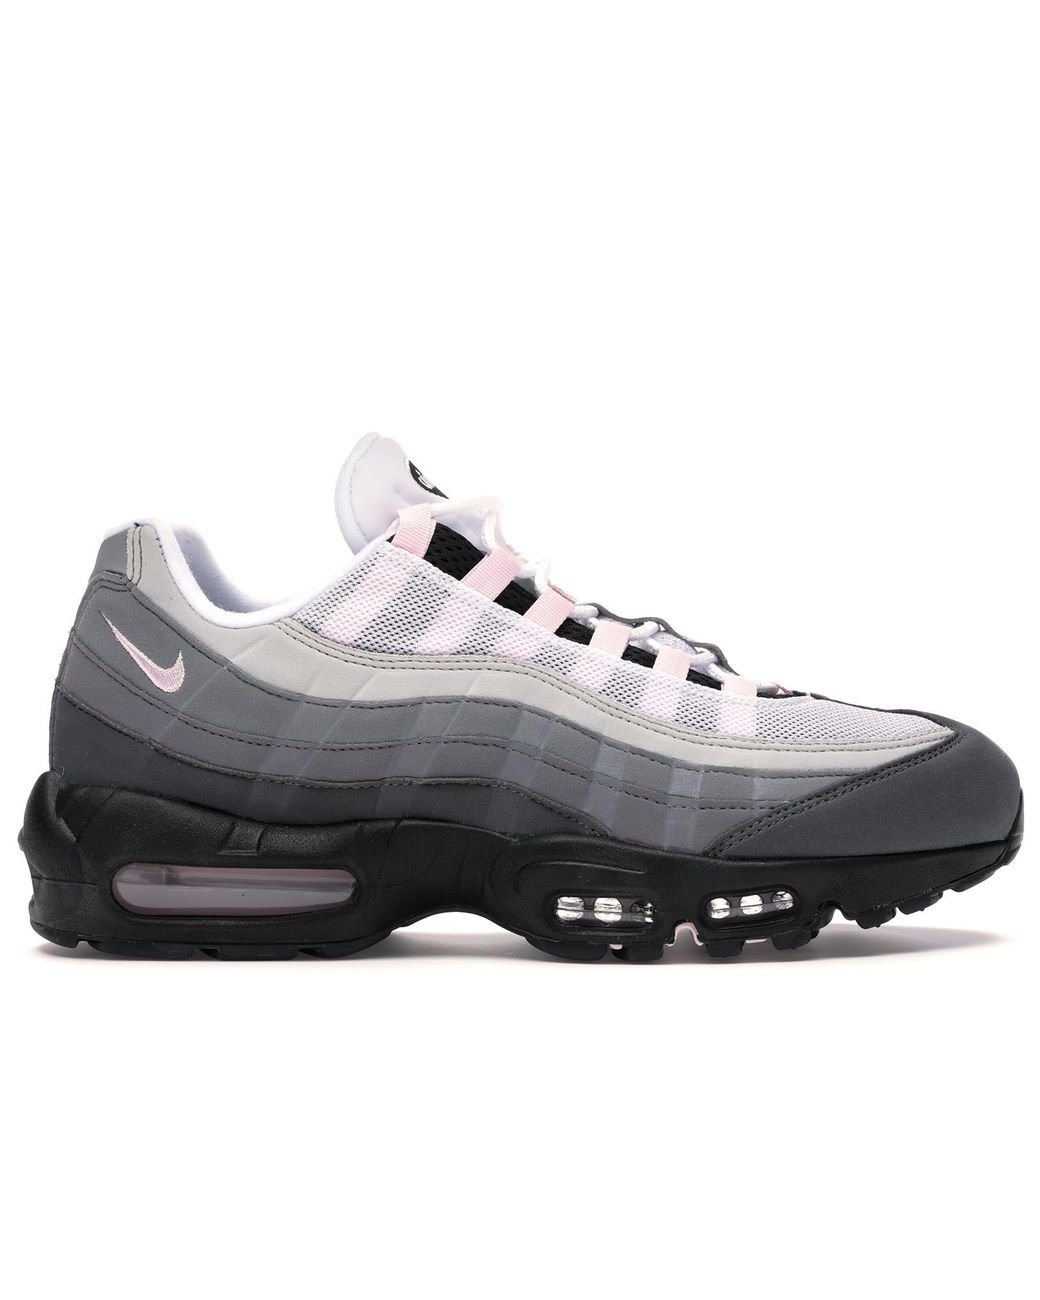 grey and pink 95s